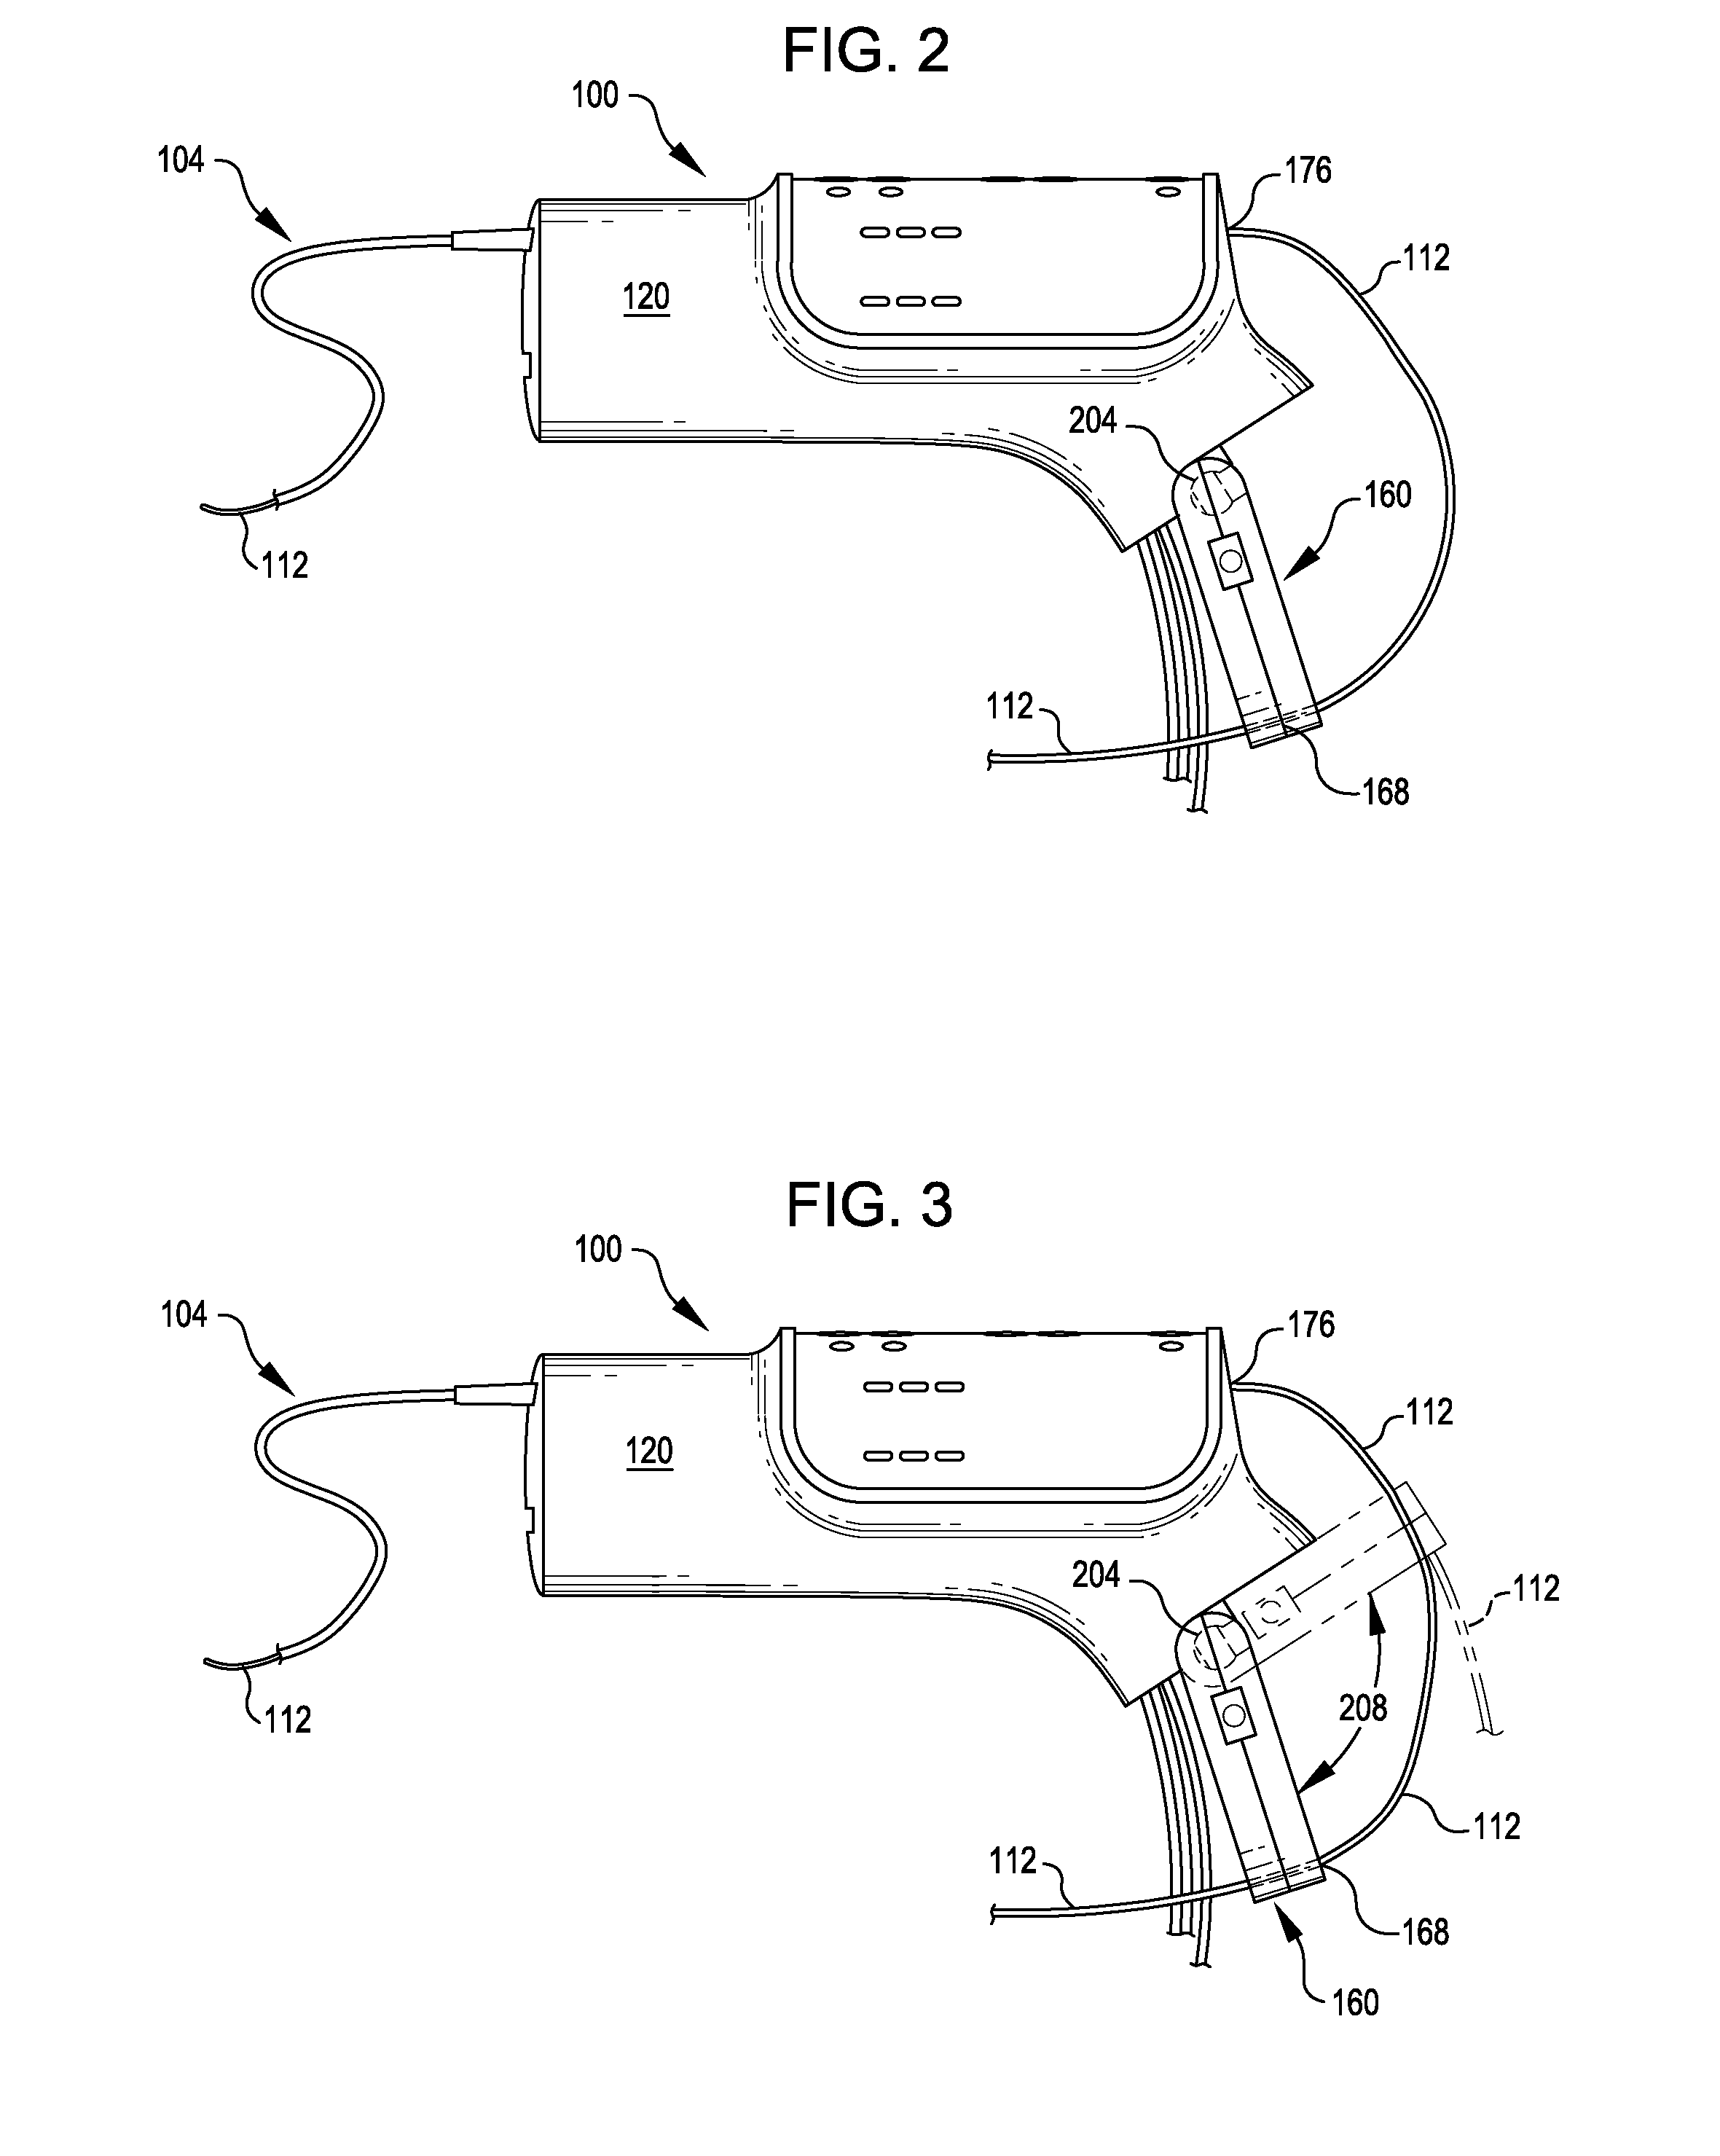 Interventional catheter assemblies incorporating guide wire brake and management systems